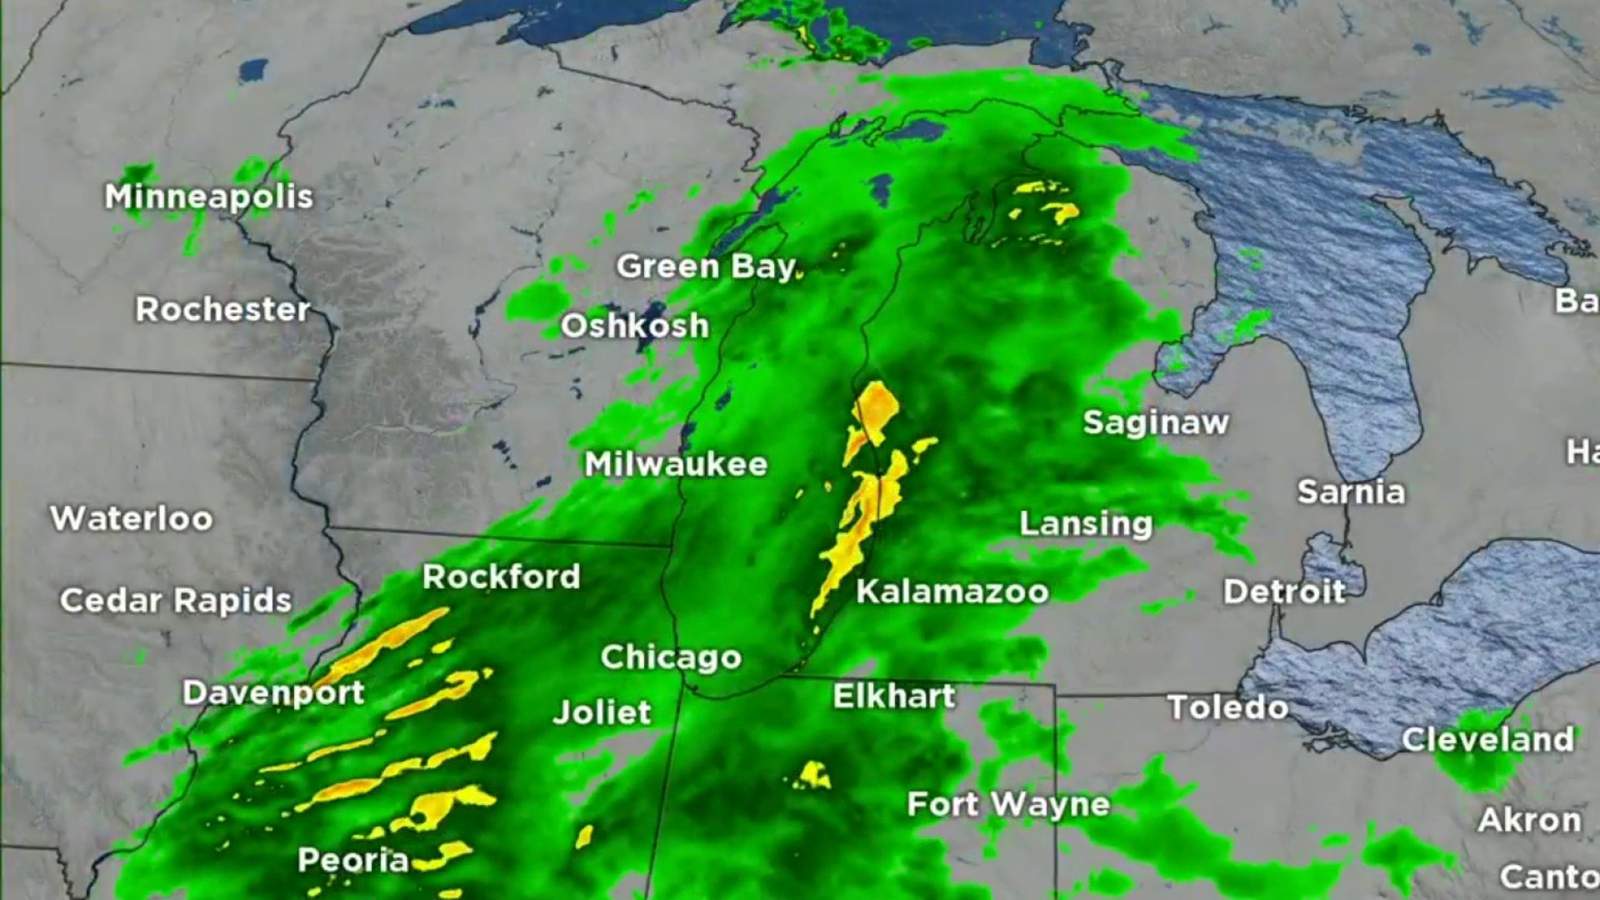 Metro Detroit weather: Chilly Saturday night with showers